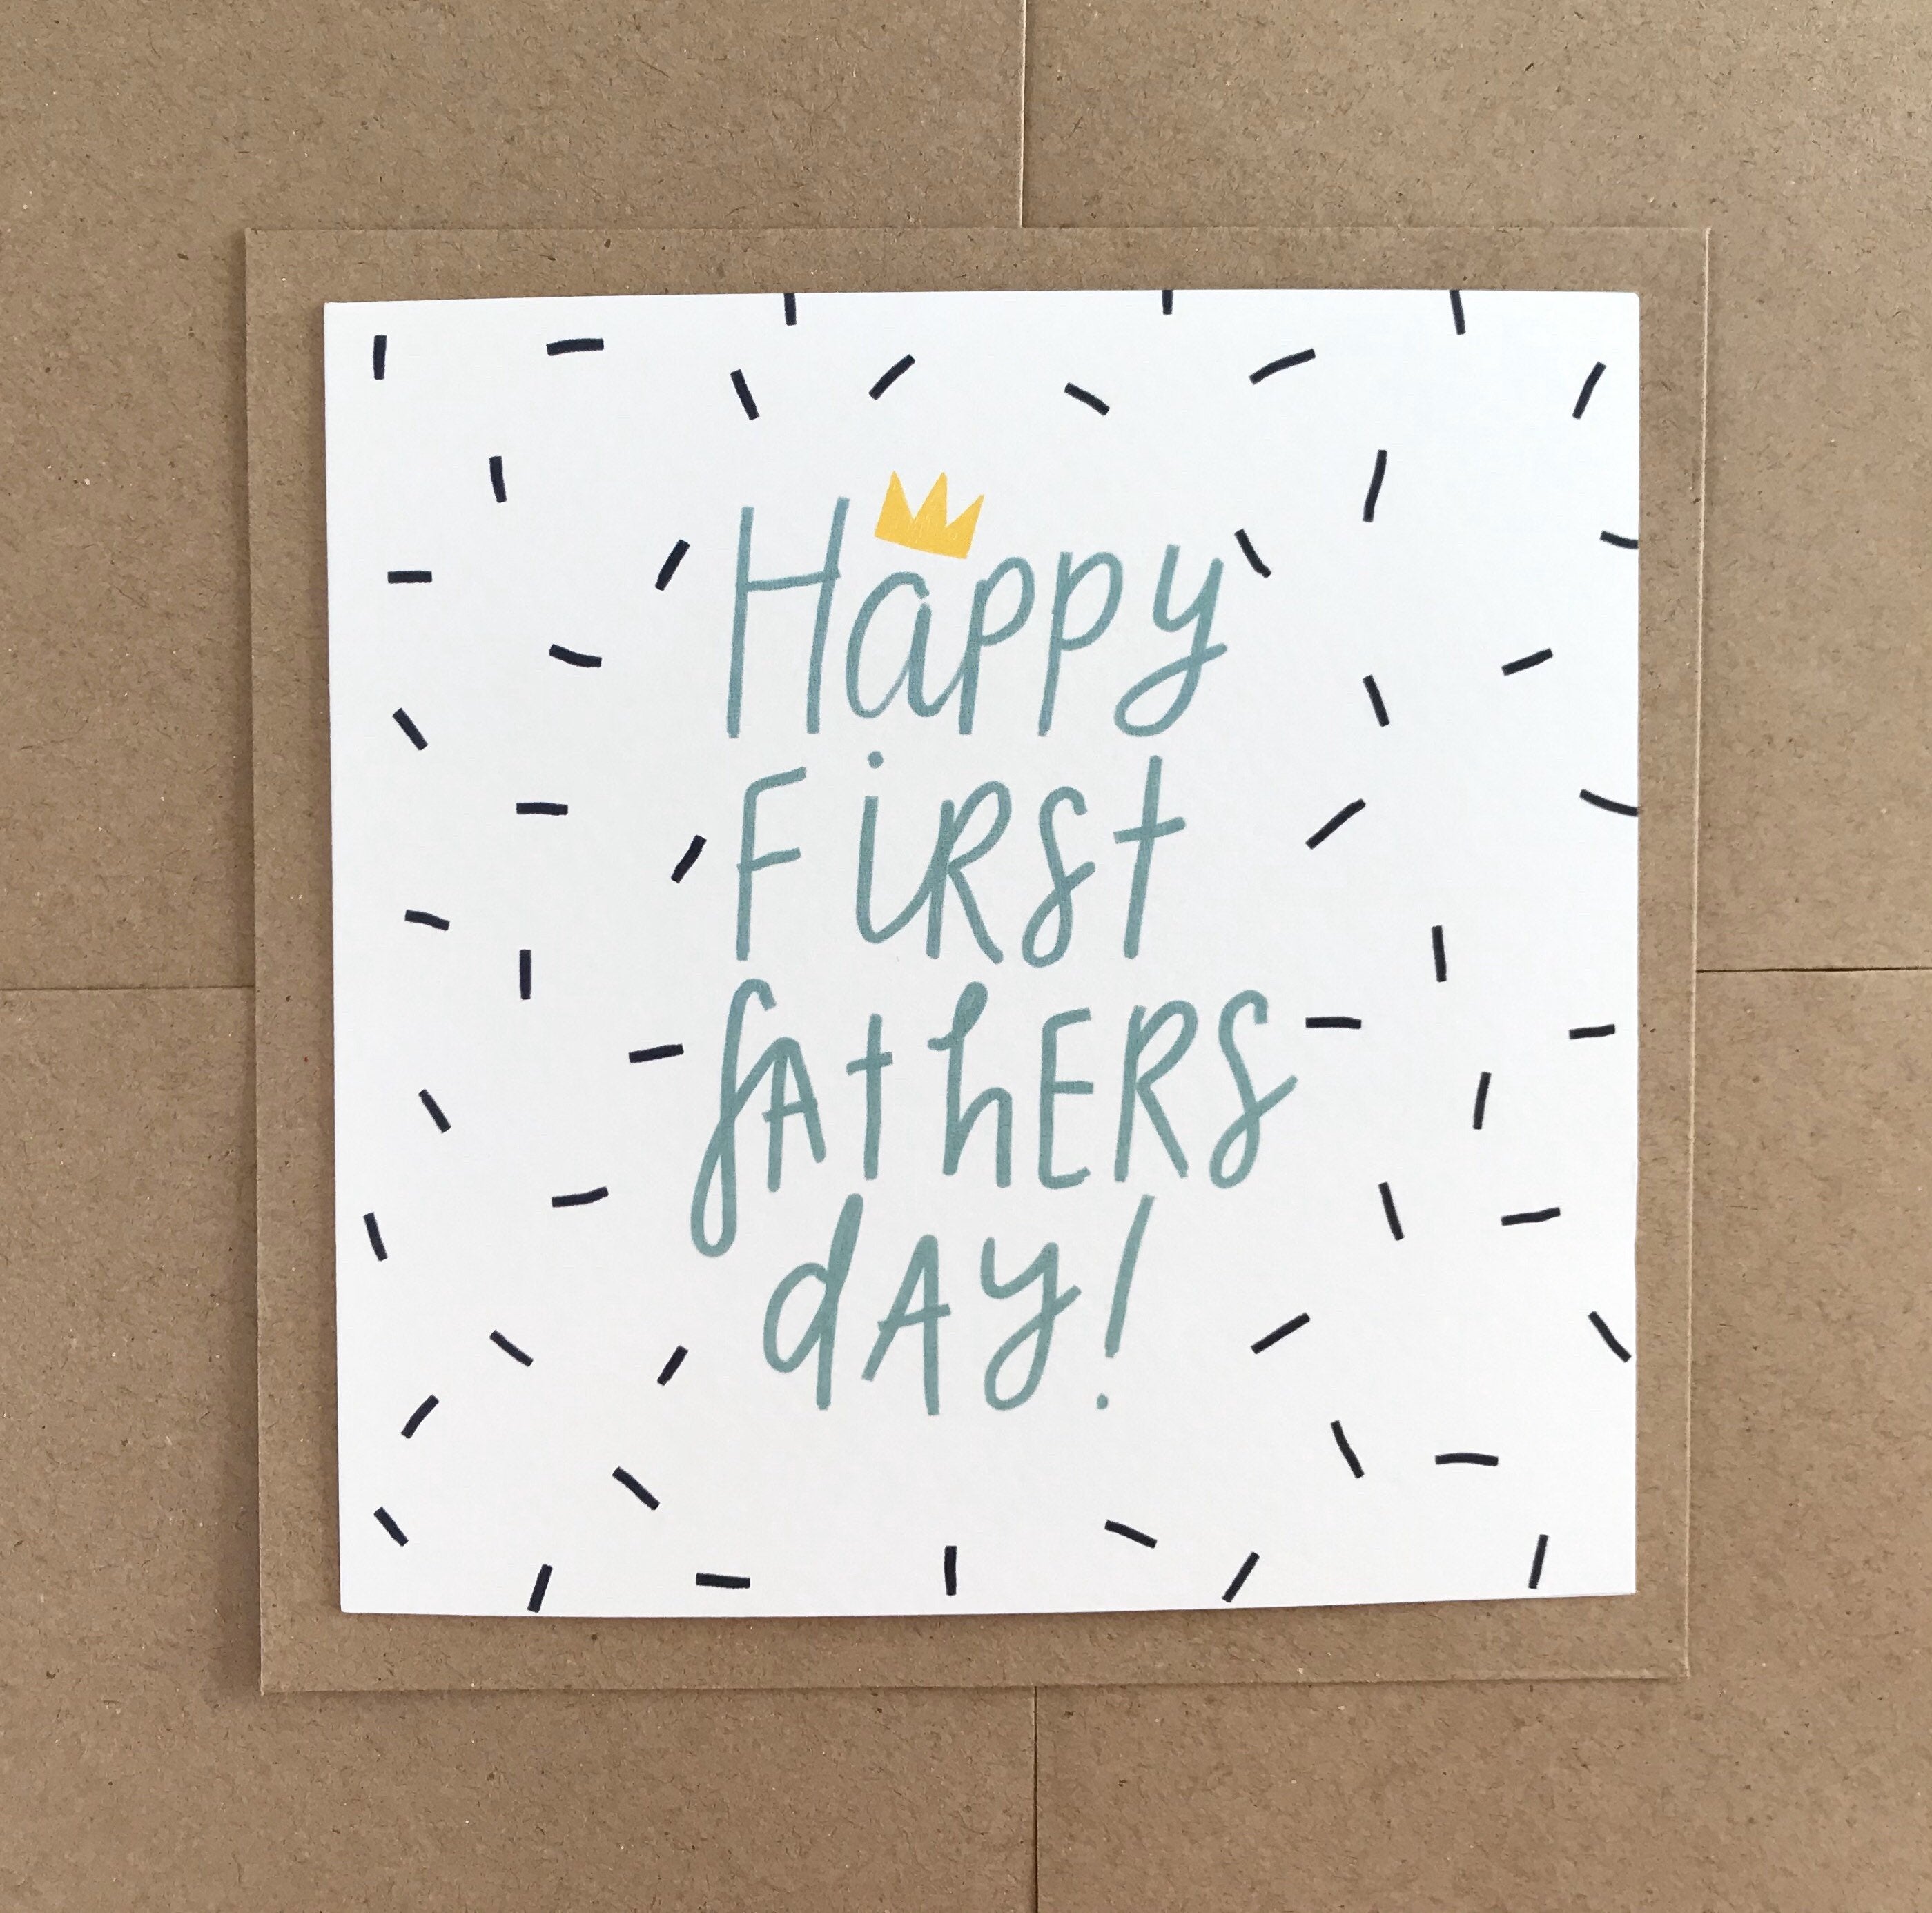 Happy First Father’s Day!